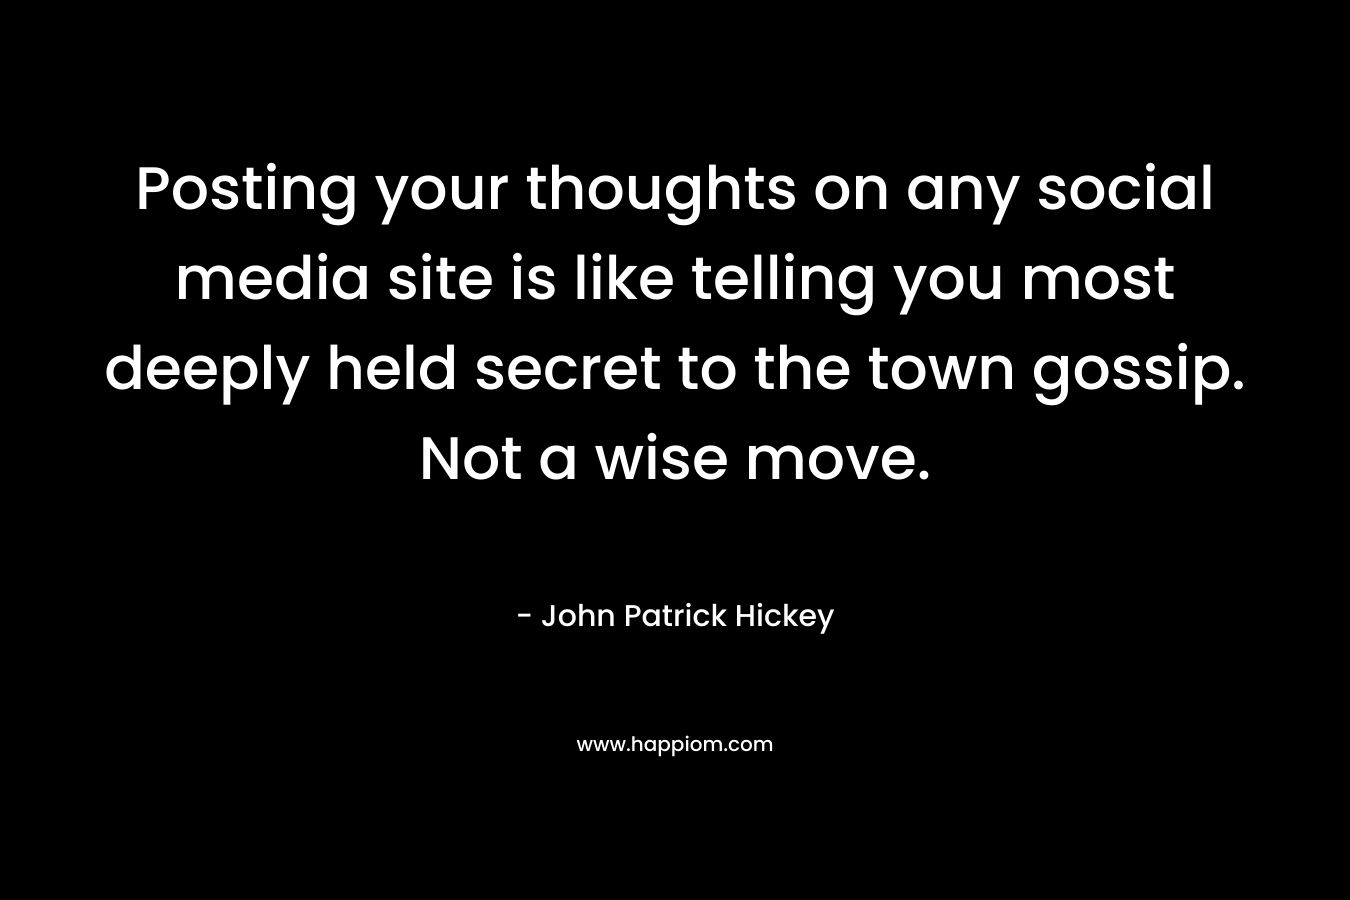 Posting your thoughts on any social media site is like telling you most deeply held secret to the town gossip. Not a wise move. – John Patrick Hickey